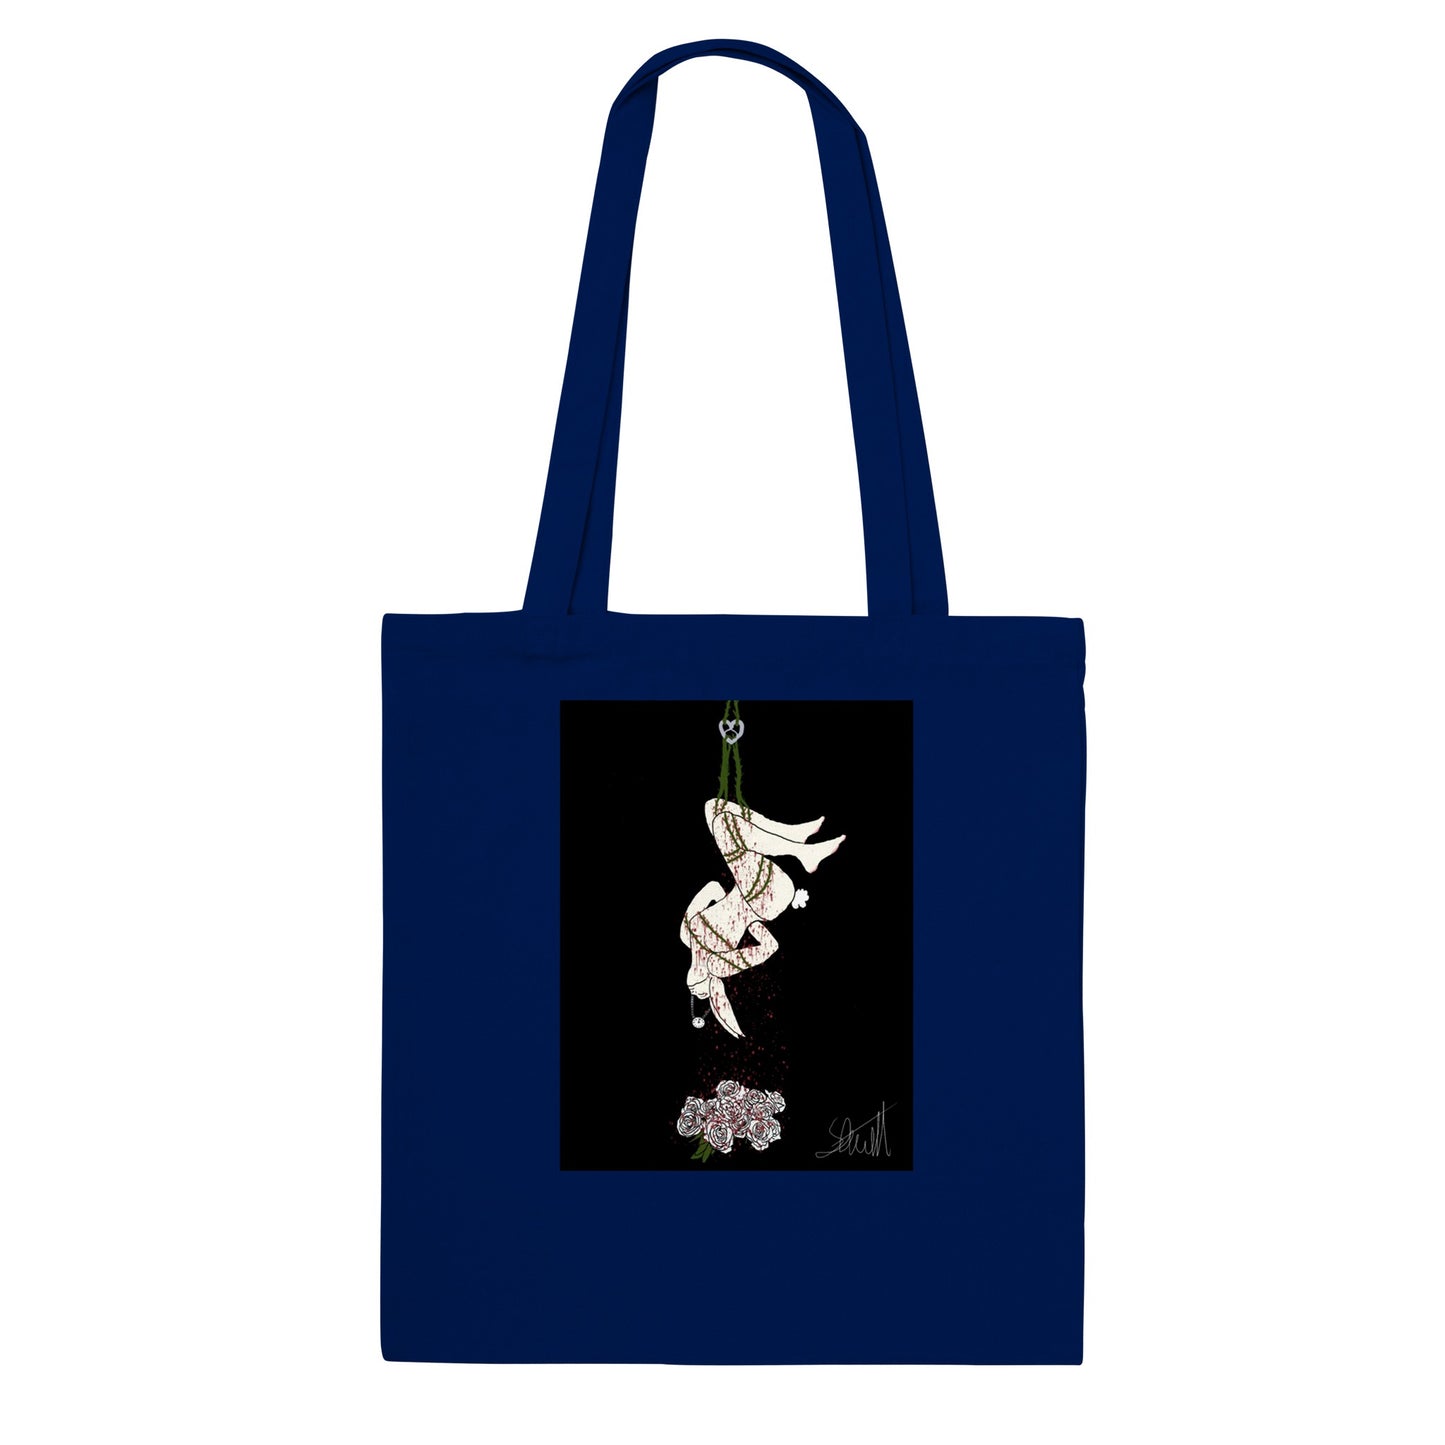 I Must Not Be Late - Classic Tote Bag